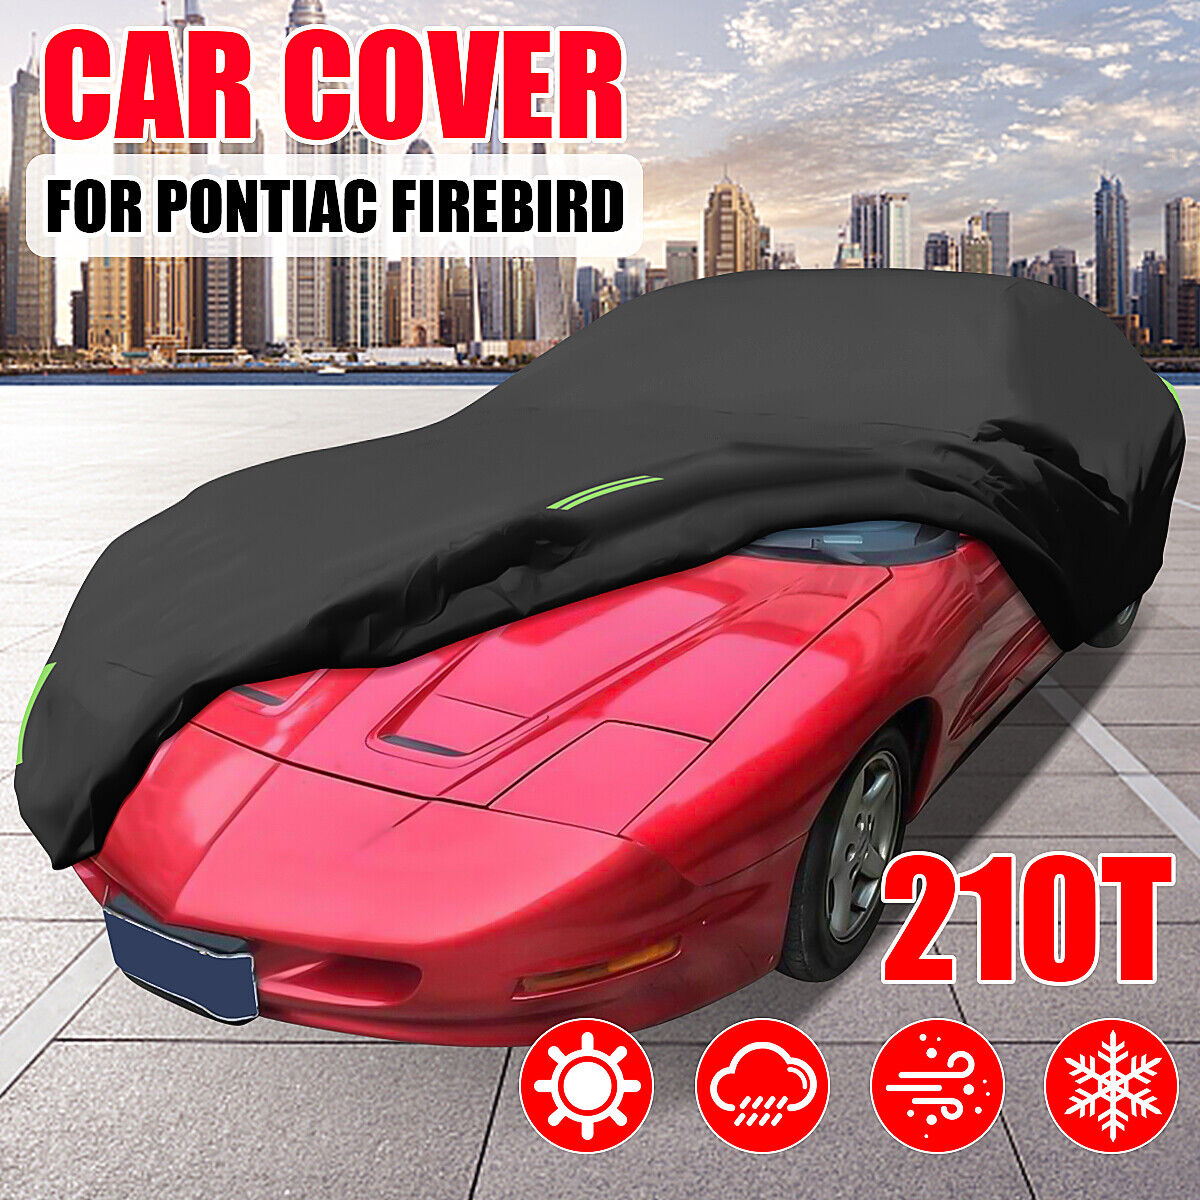 For Pontiac Firebird 210T Car Cover Waterproof All Weather Dust Scratch Proof US